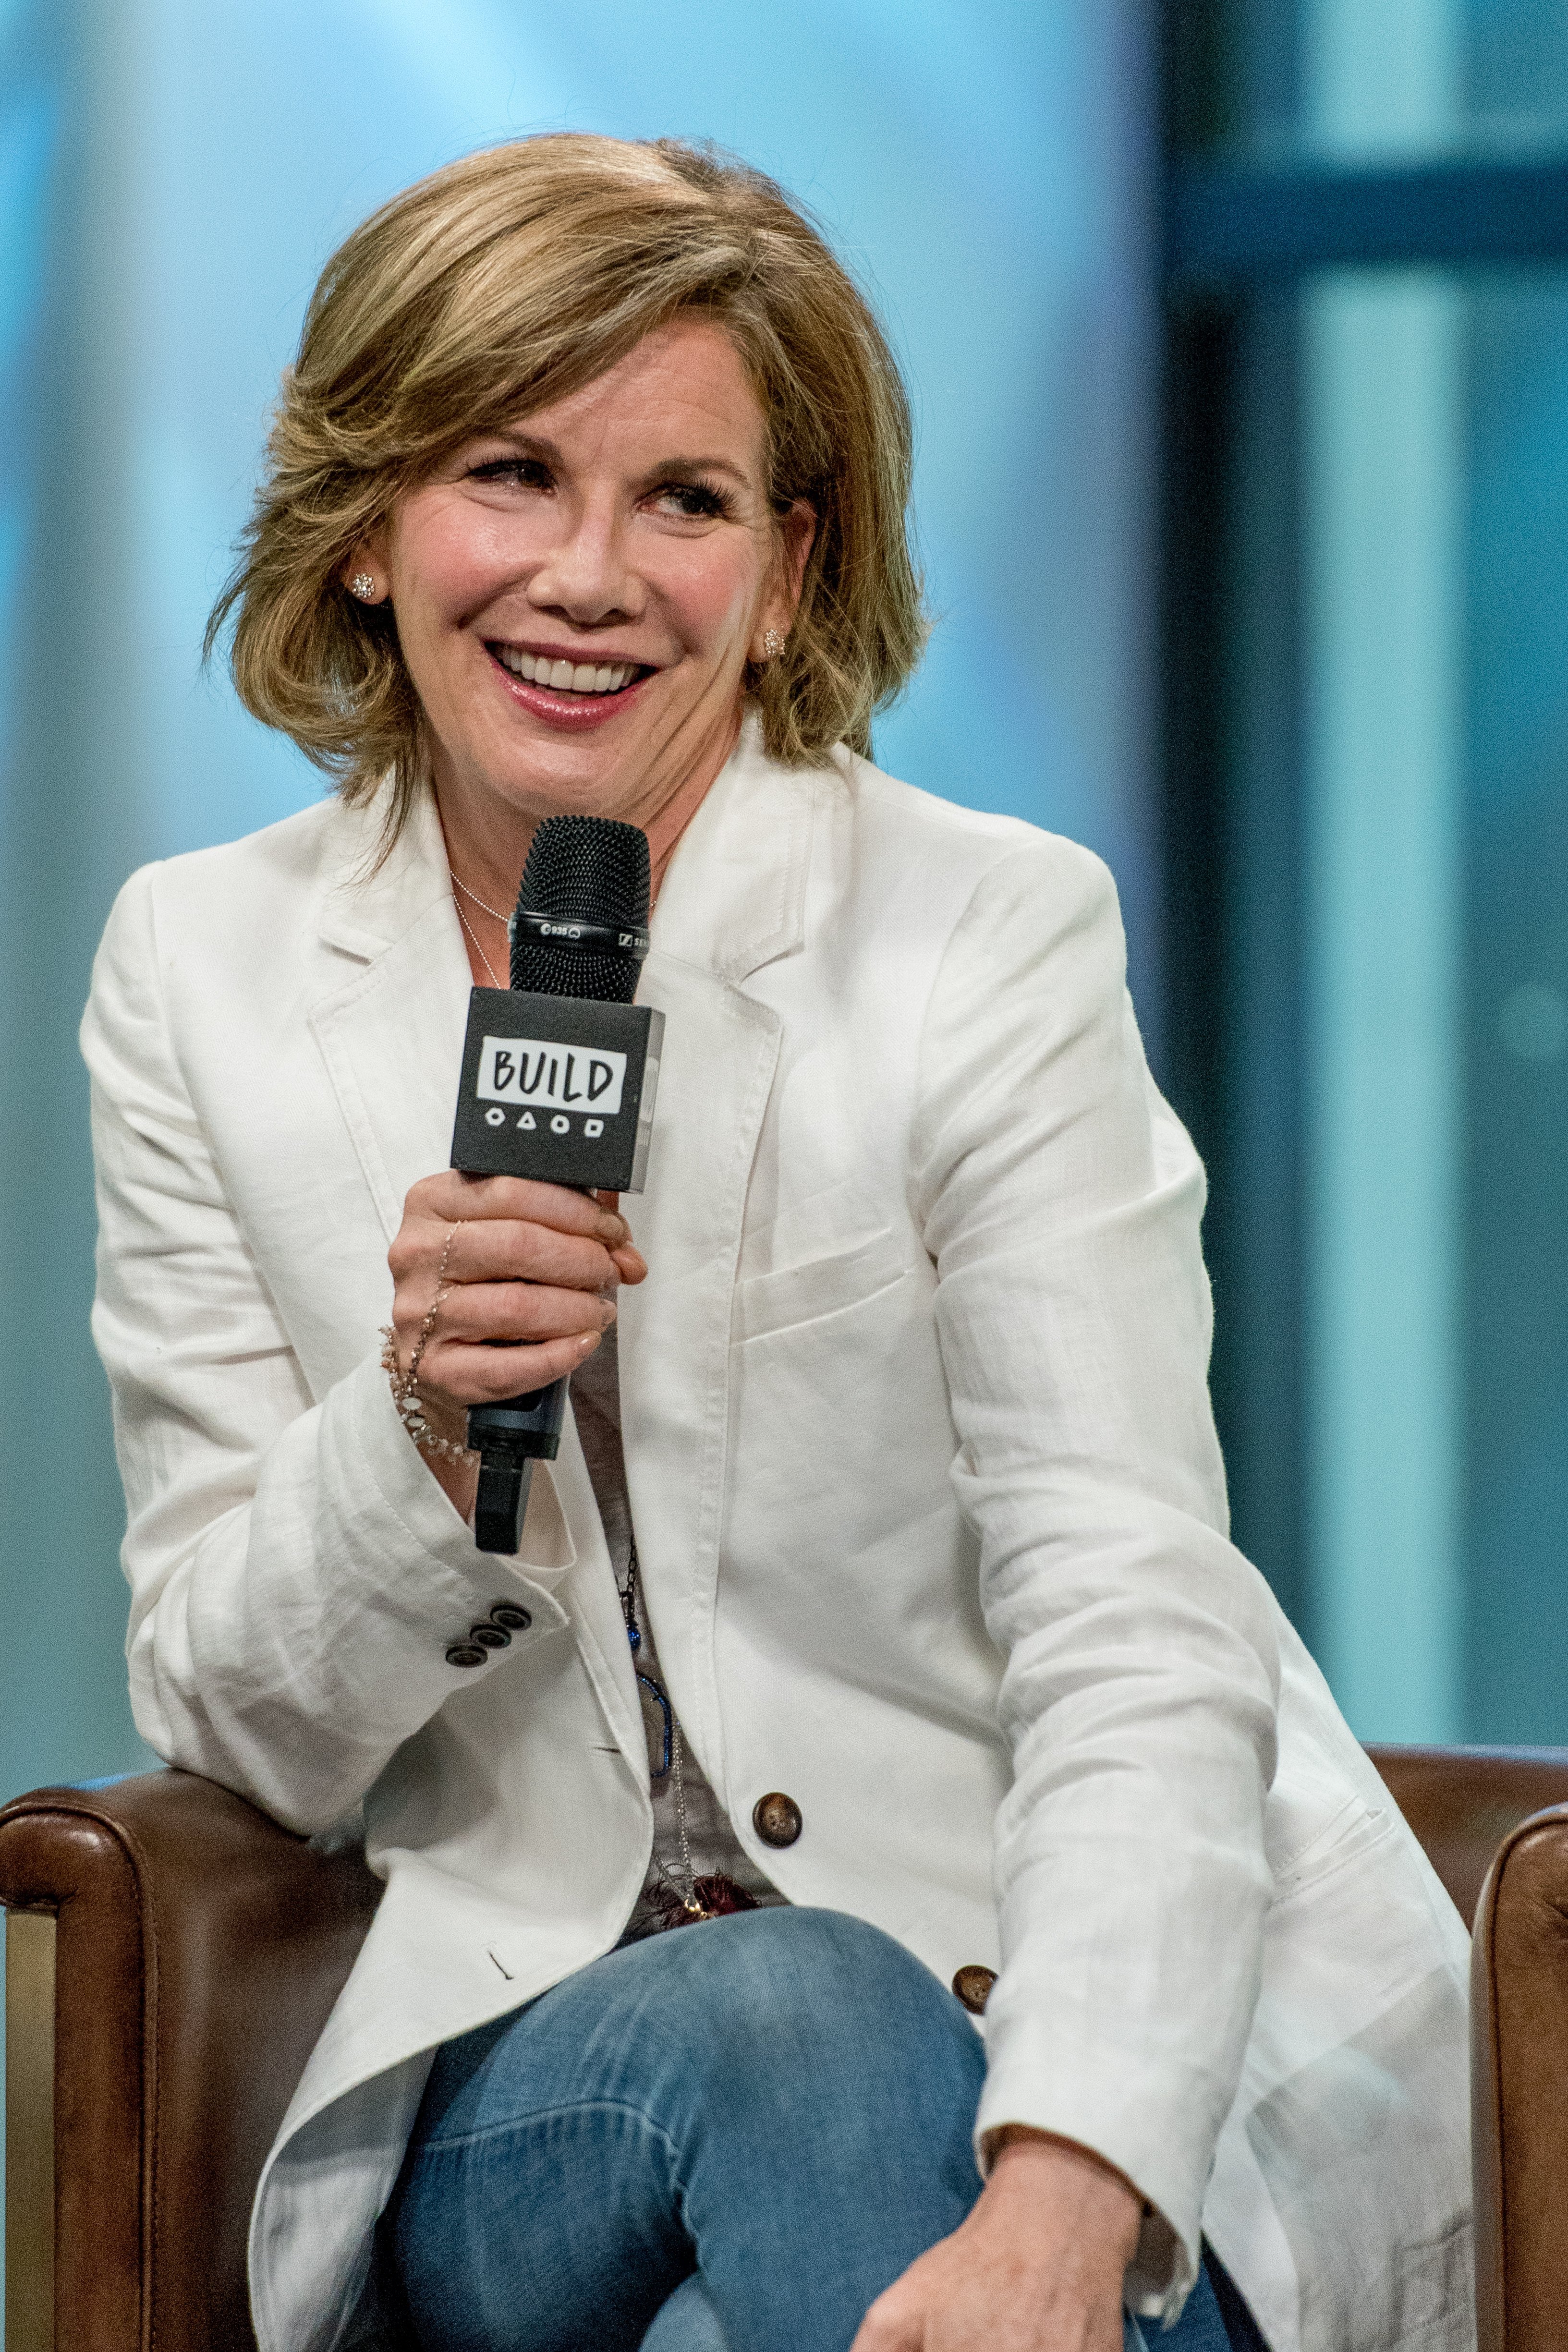 Melissa Gilbert discusses "If Only" with the BuiLd Series at Build Studio on August 14, 2017. | Photo: Getty Images